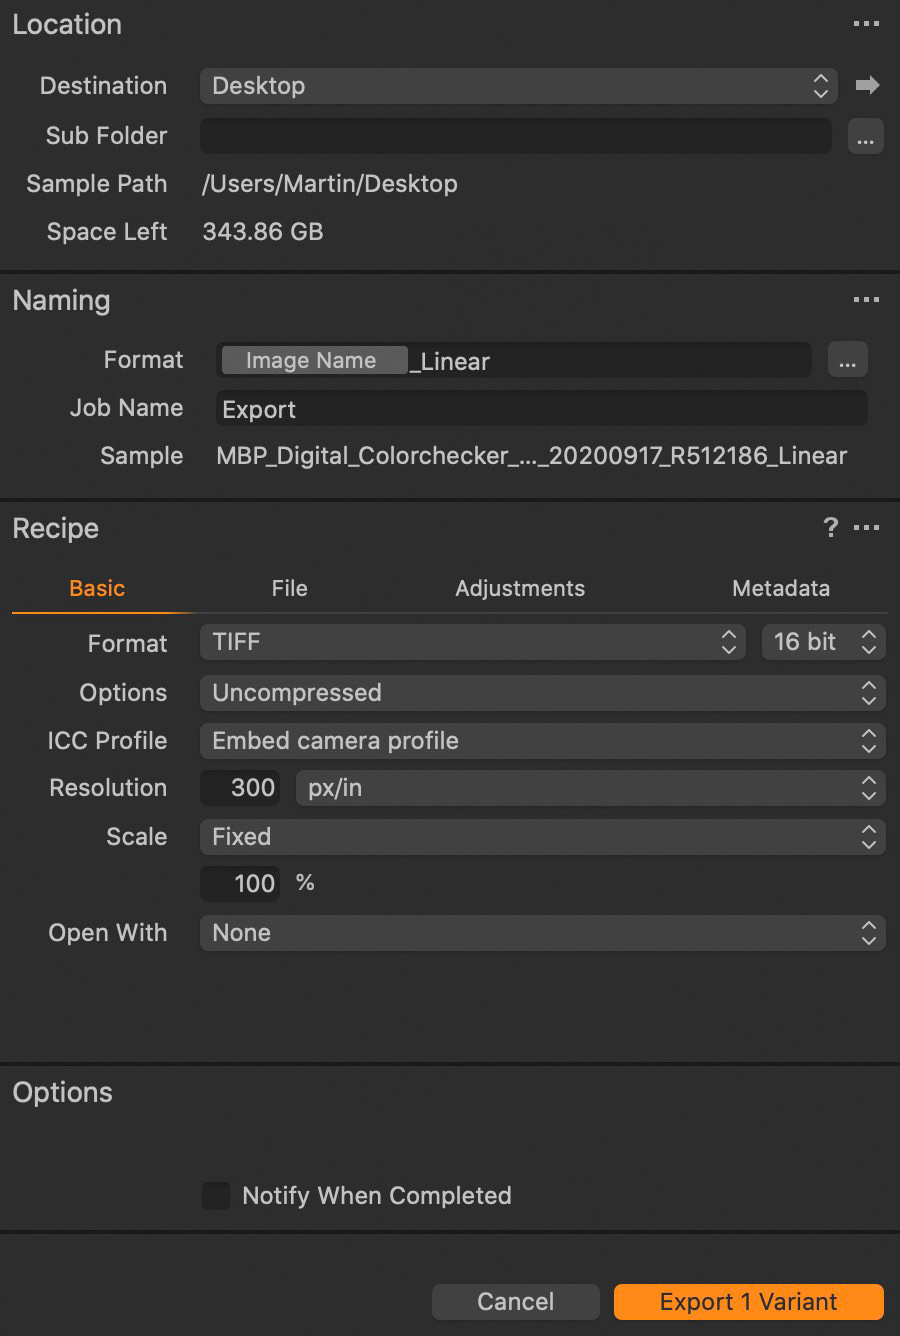 Exporting TIFF 16bit with Embedded Camera Profile